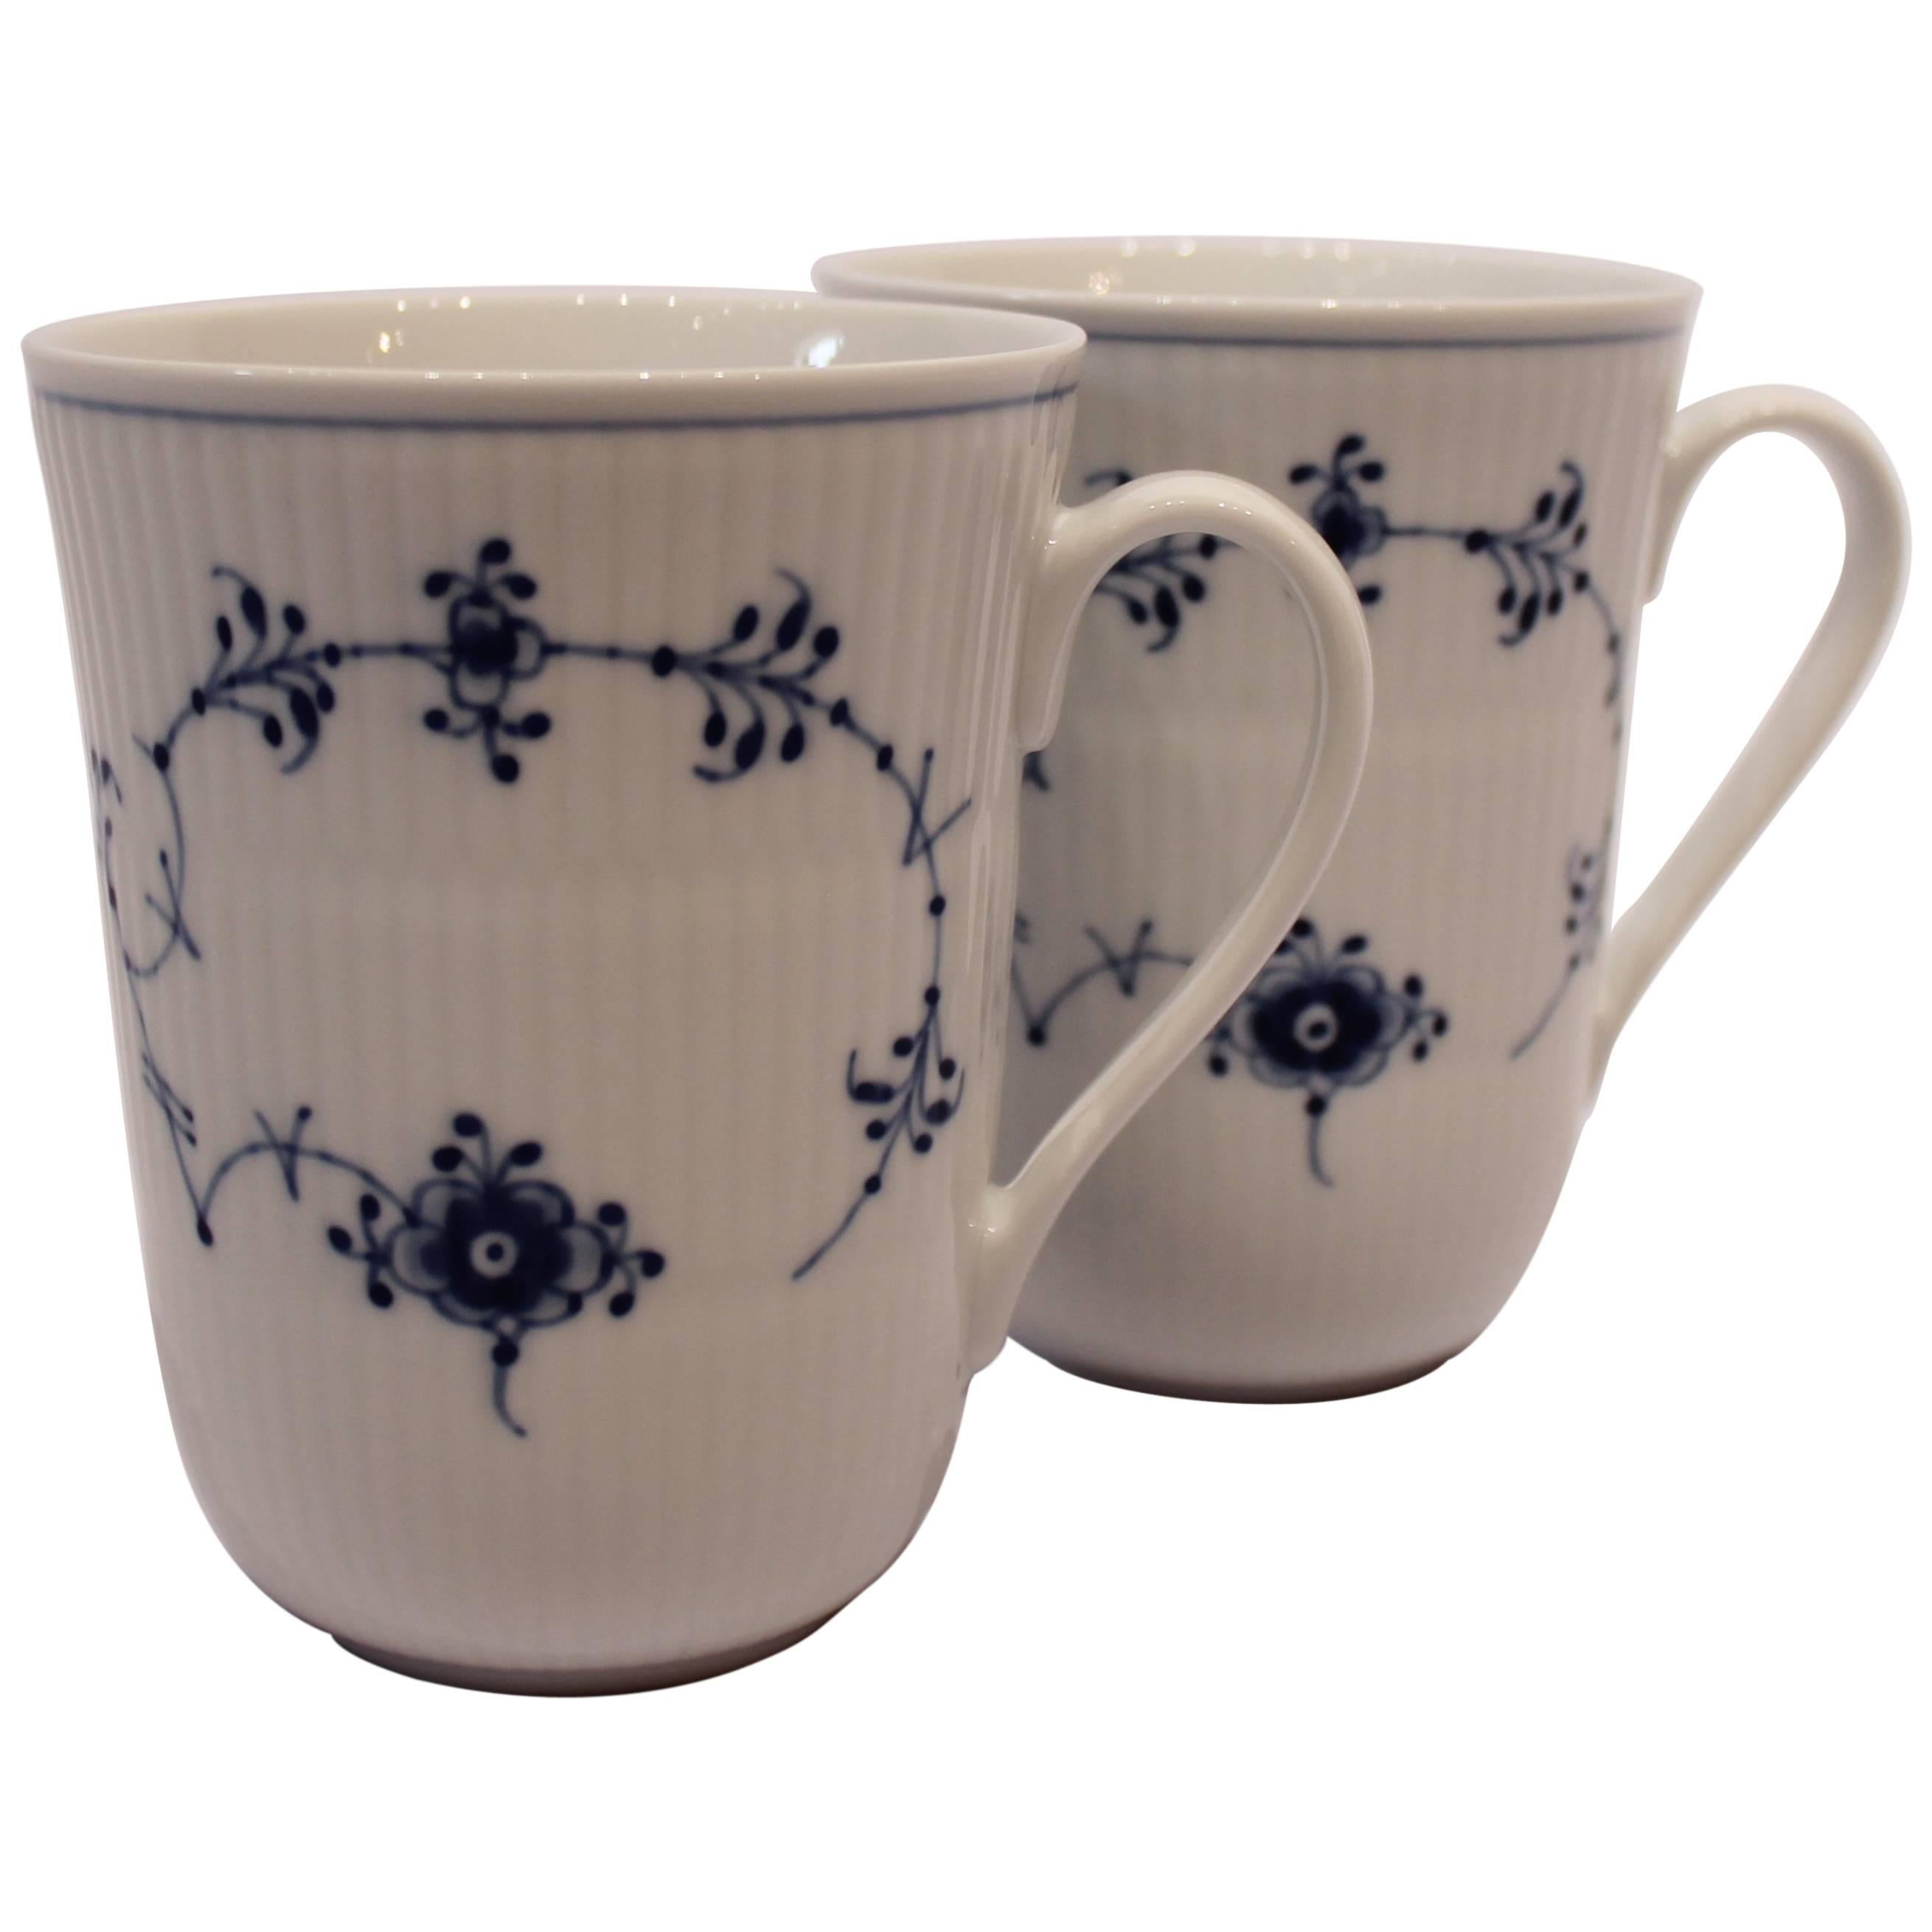 Pair of Blue Fluted Cups No 497 by Royal Copenhagen